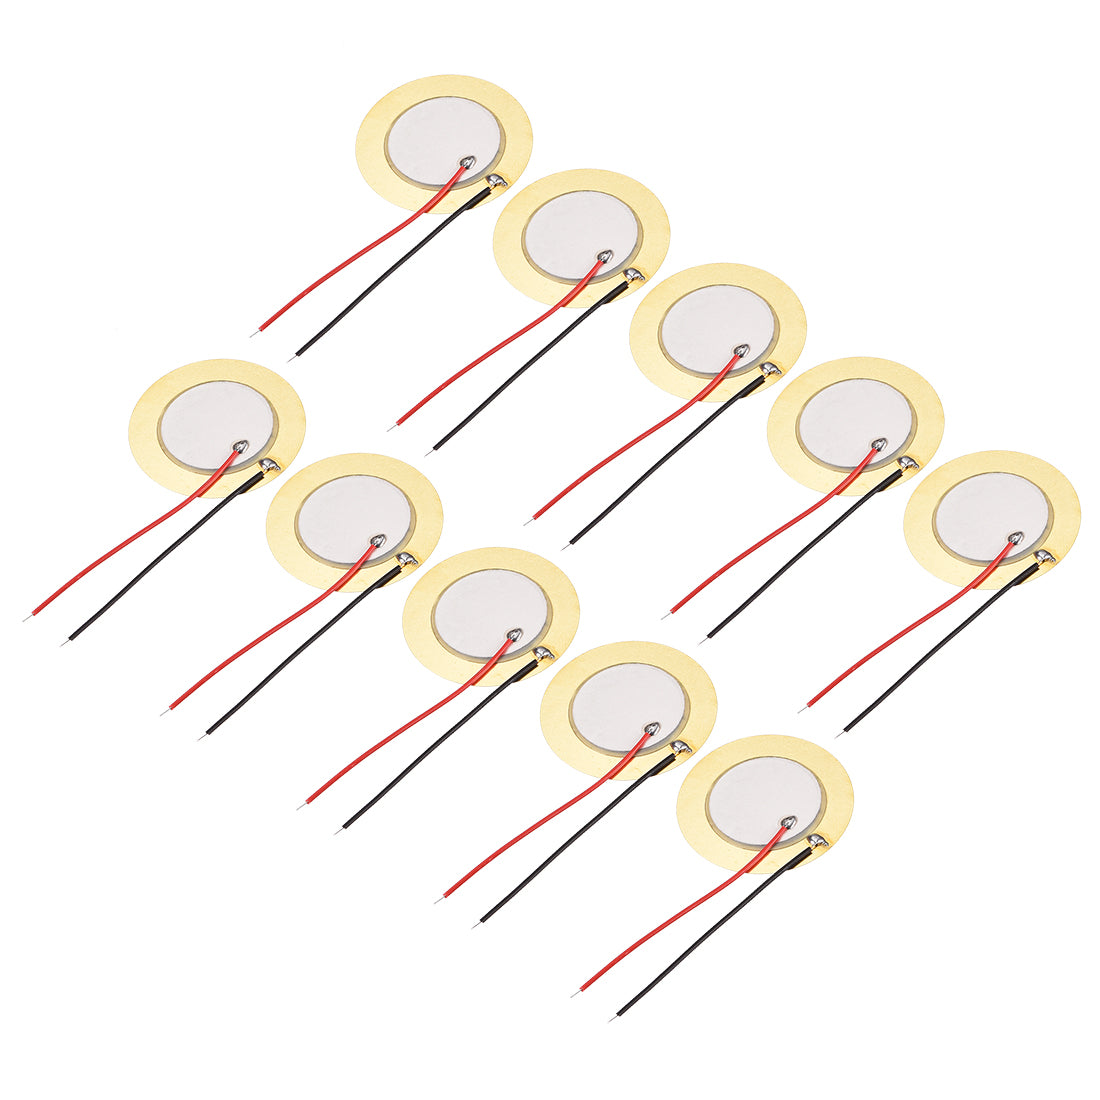 uxcell Uxcell 10 Pcs Piezo Discs 35mm Acoustic Pickup Transducer Microphone Trigger Element CBG Guitar